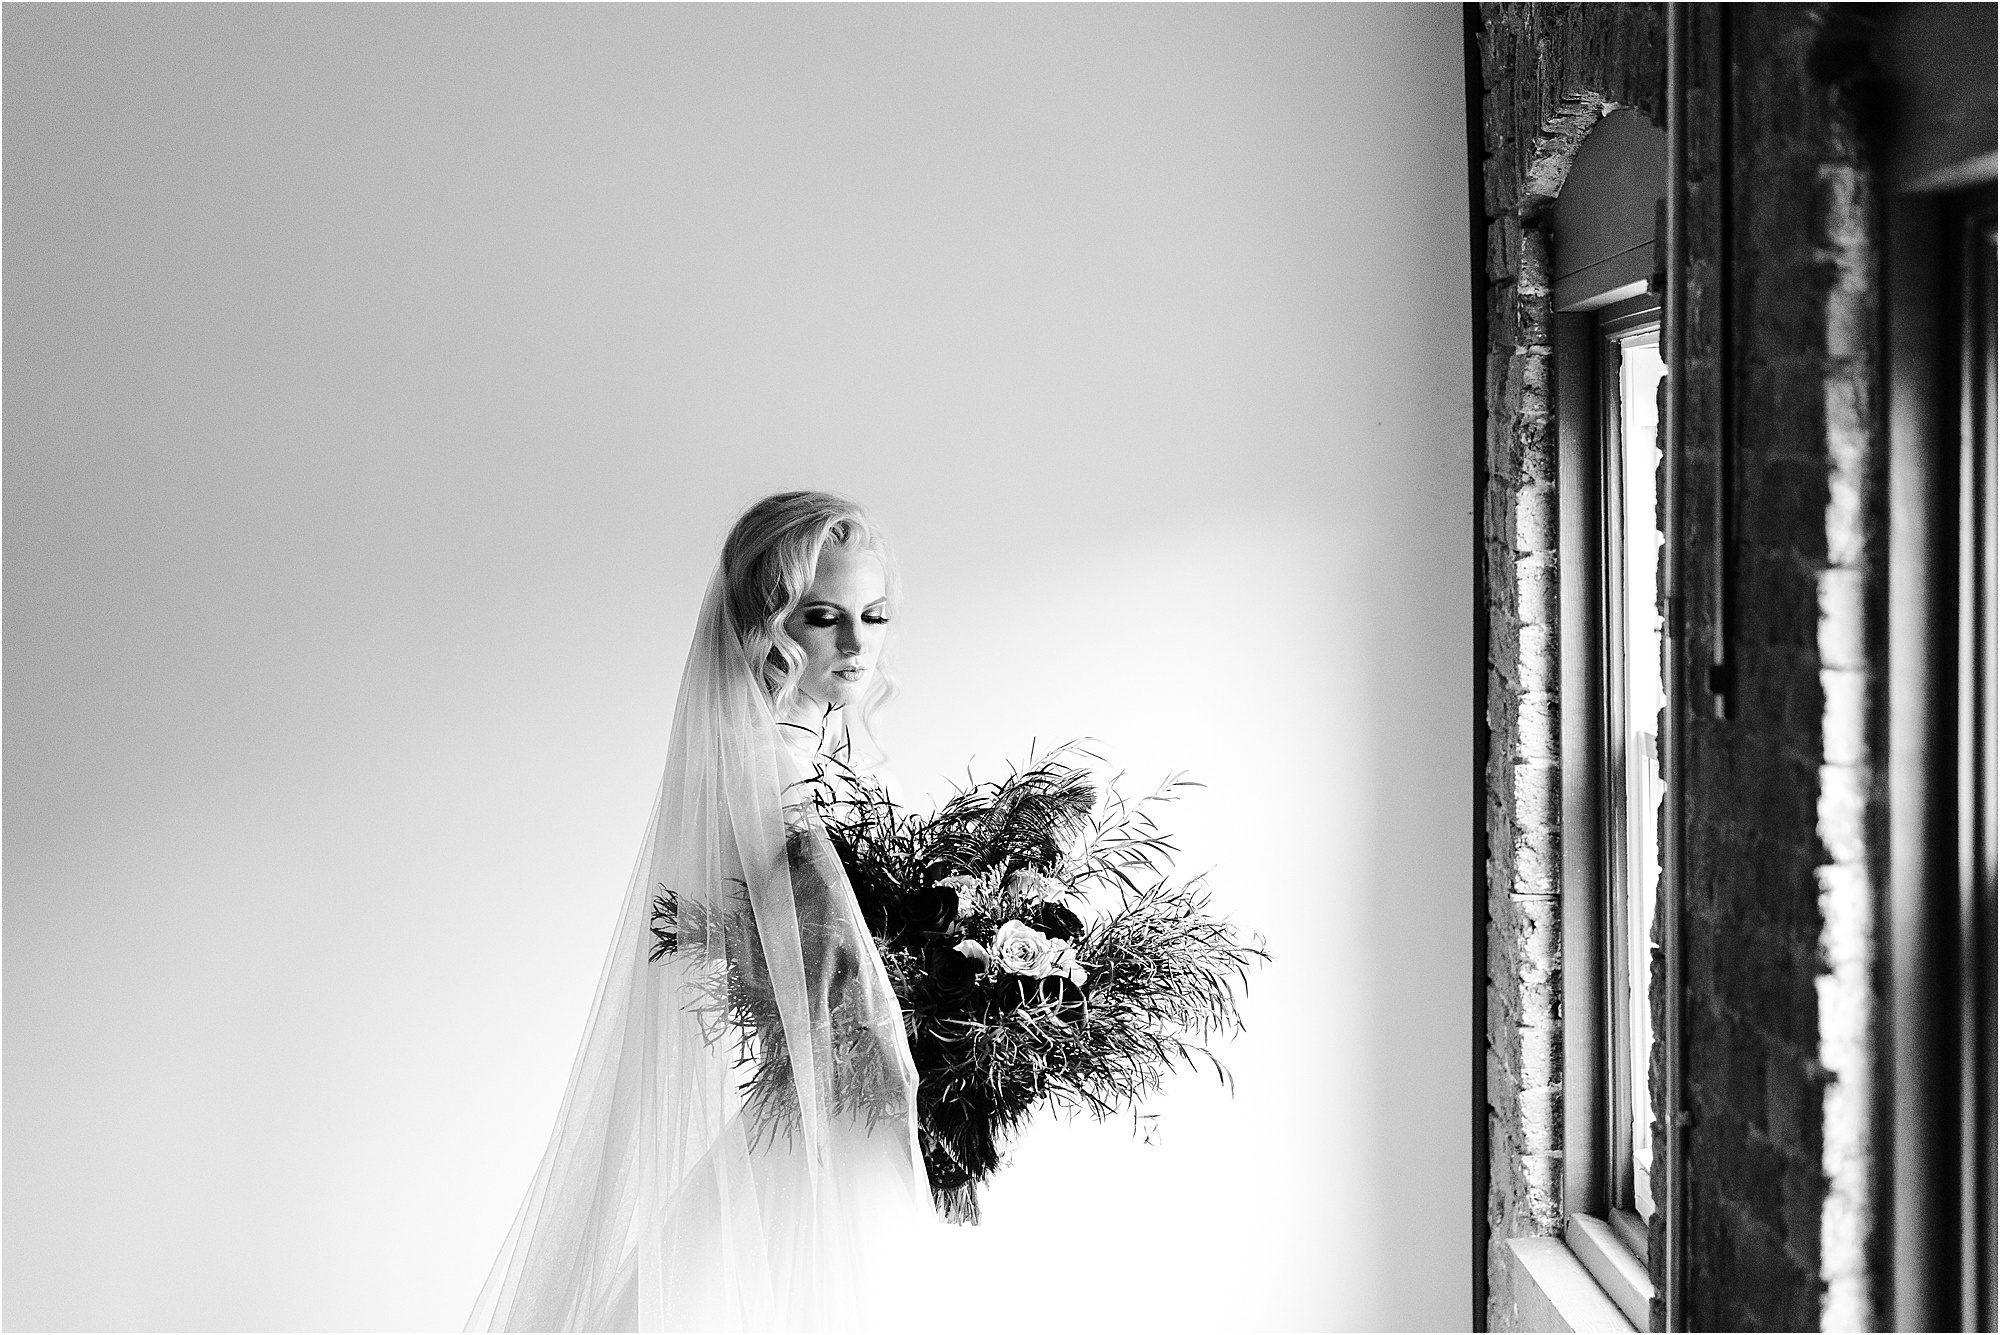 black and white bridal photo with long veil by window